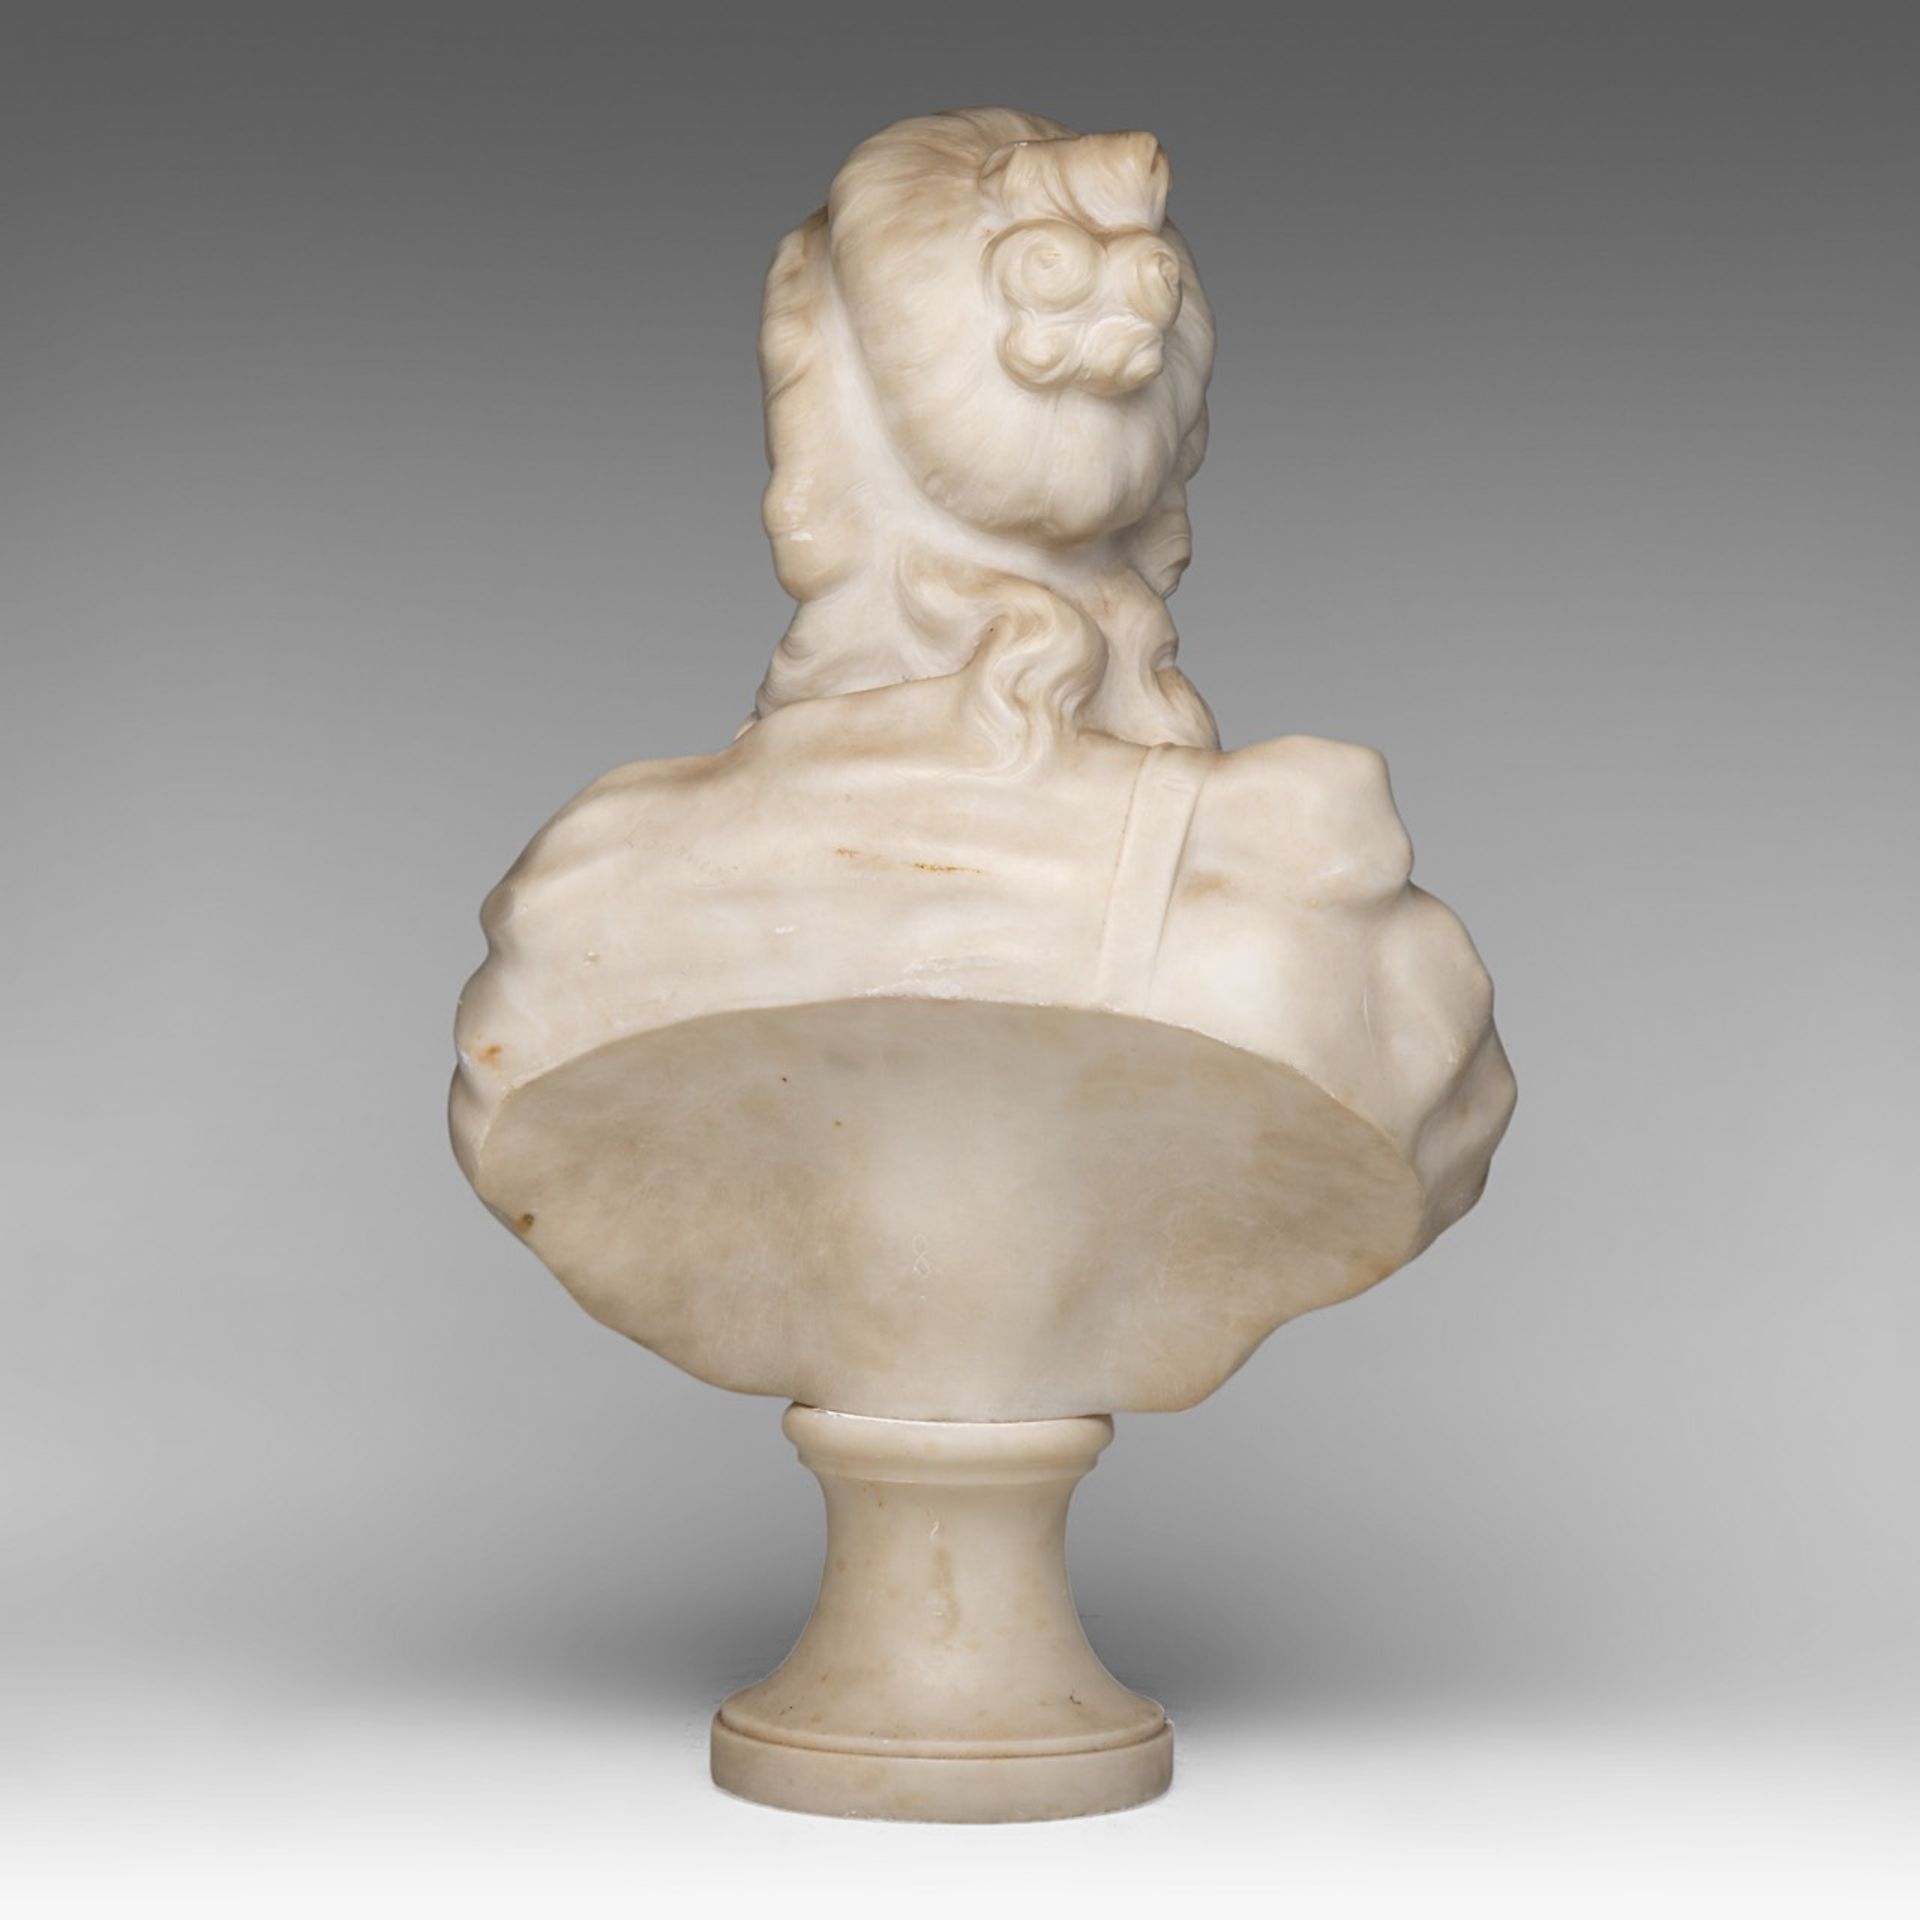 An alabaster bust of a female beauty in the Louis XVI era (Marie-Antoinette?), H 56 cm - Image 4 of 5